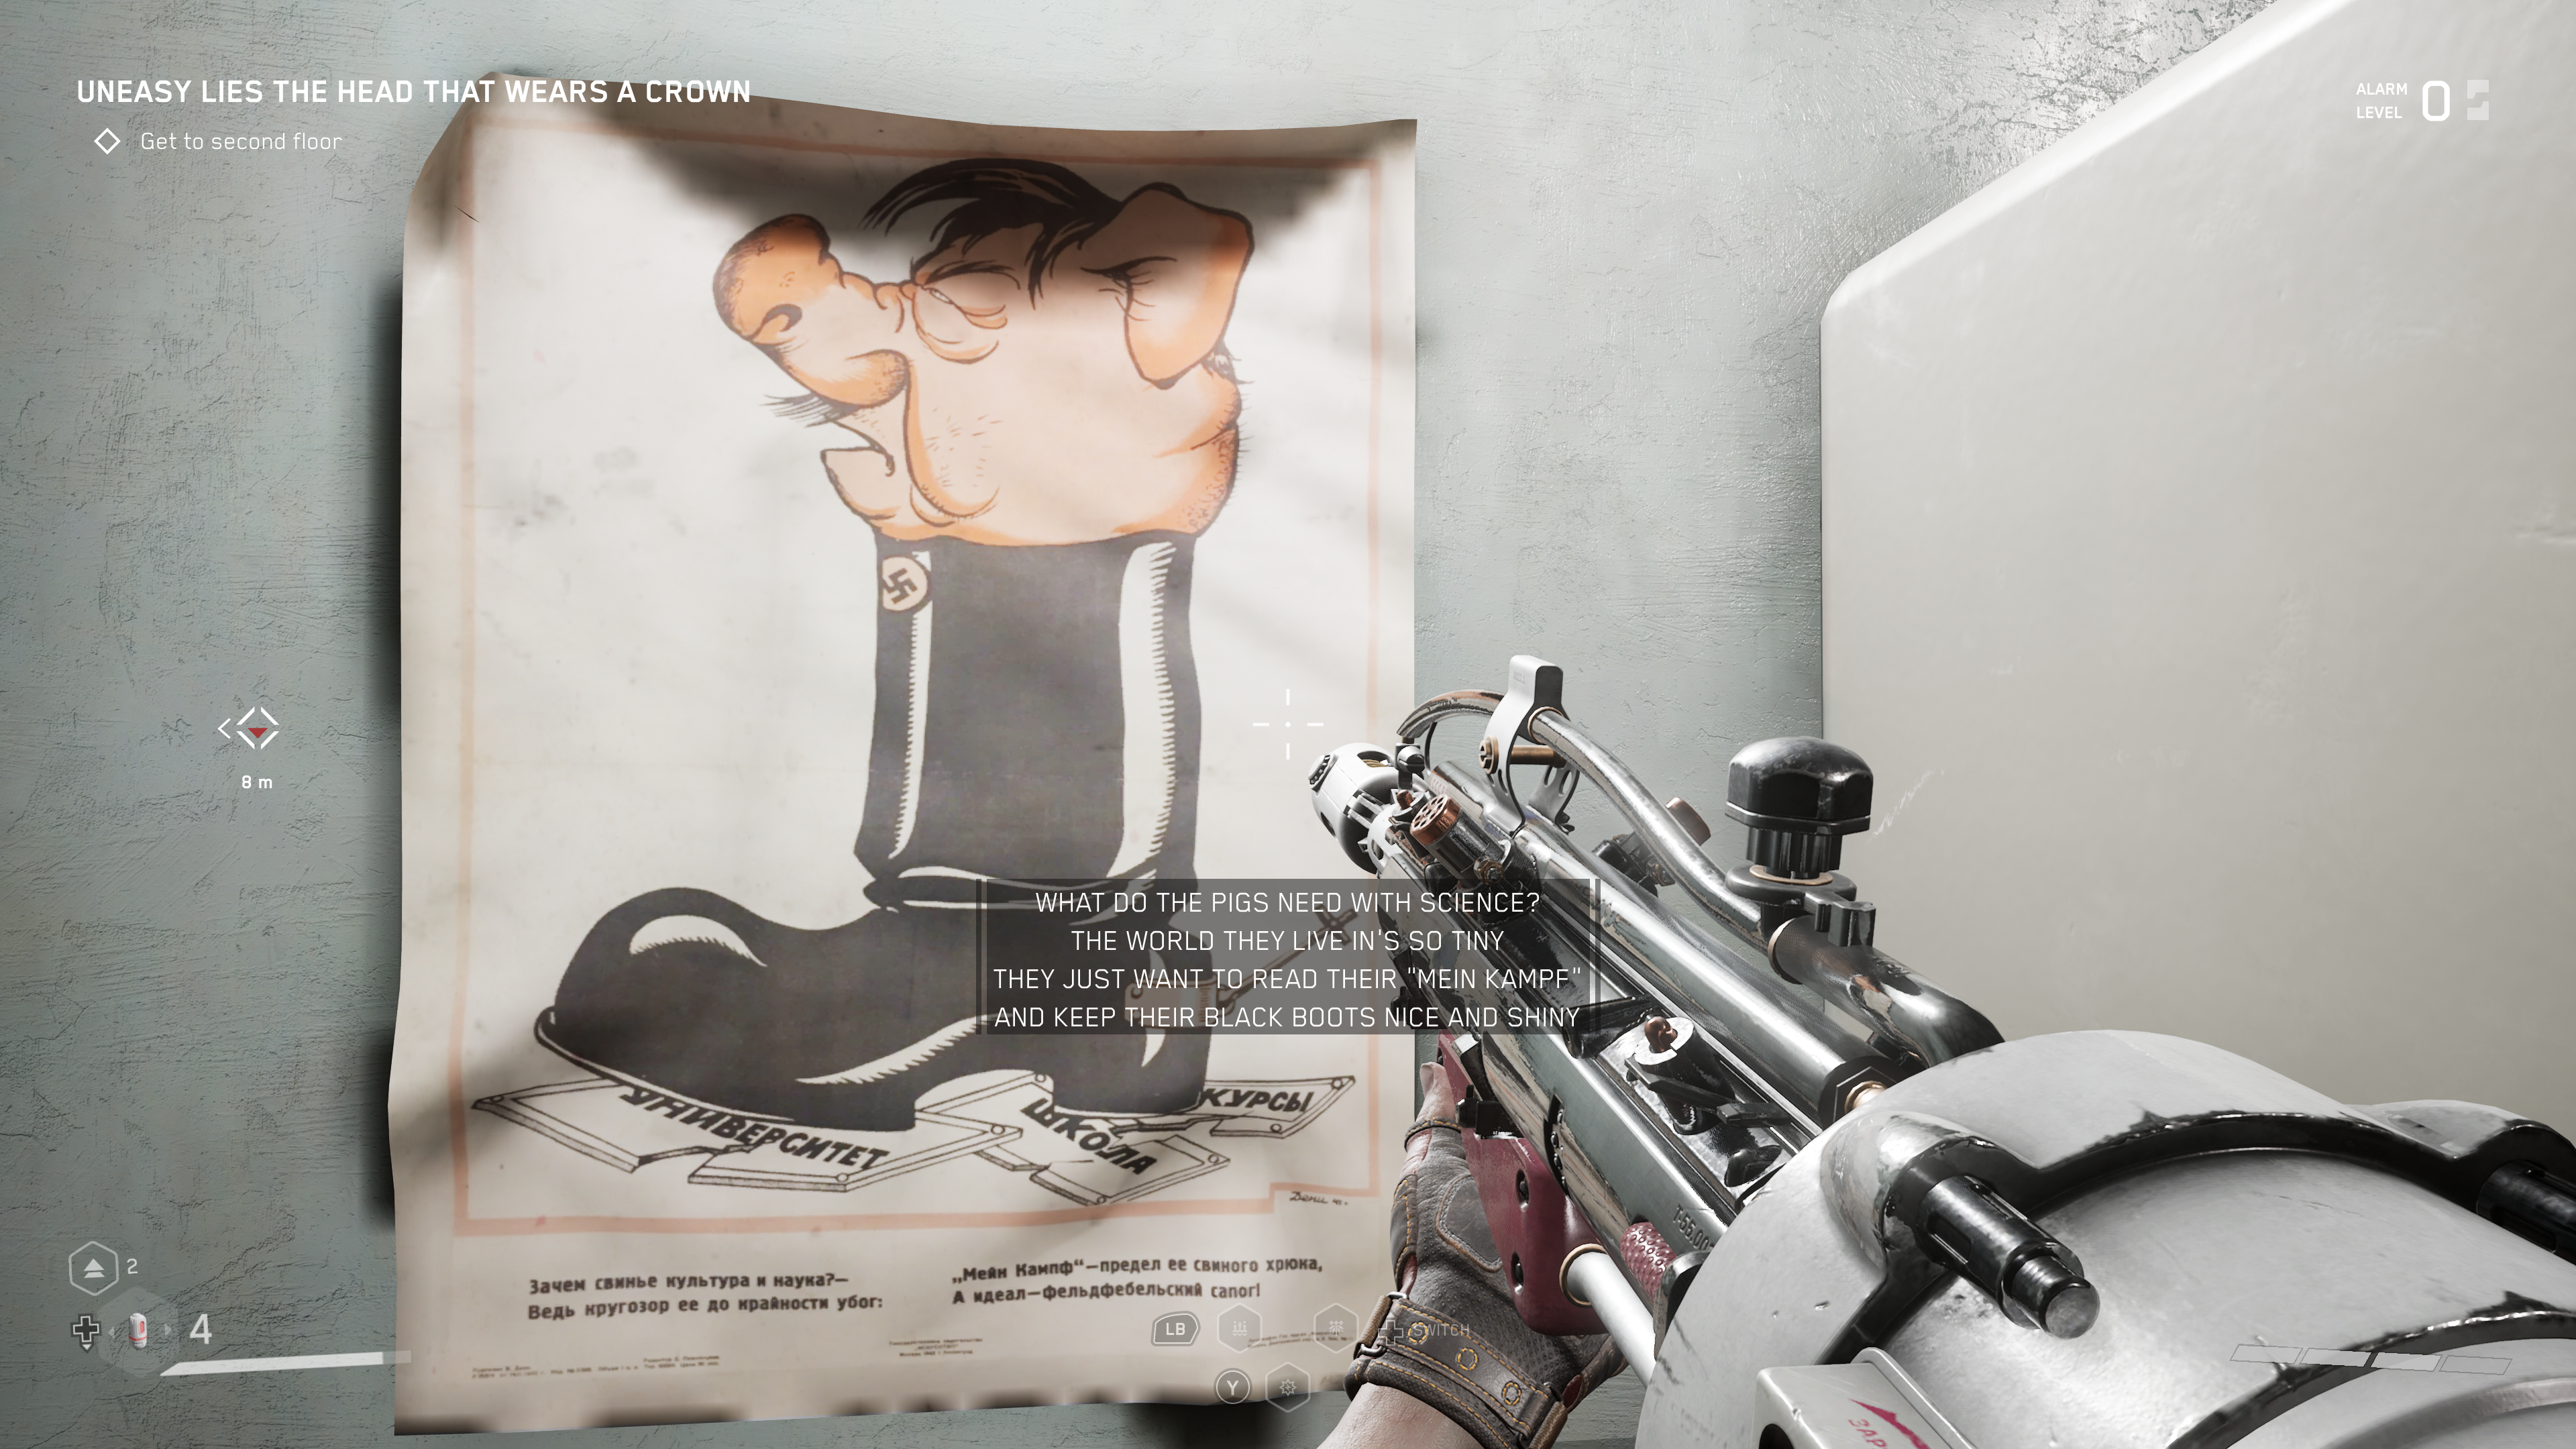 Atomic Heart review - a poster showing a pig's head charicatured as Hitler inside a black boot with a caption mocking fascists